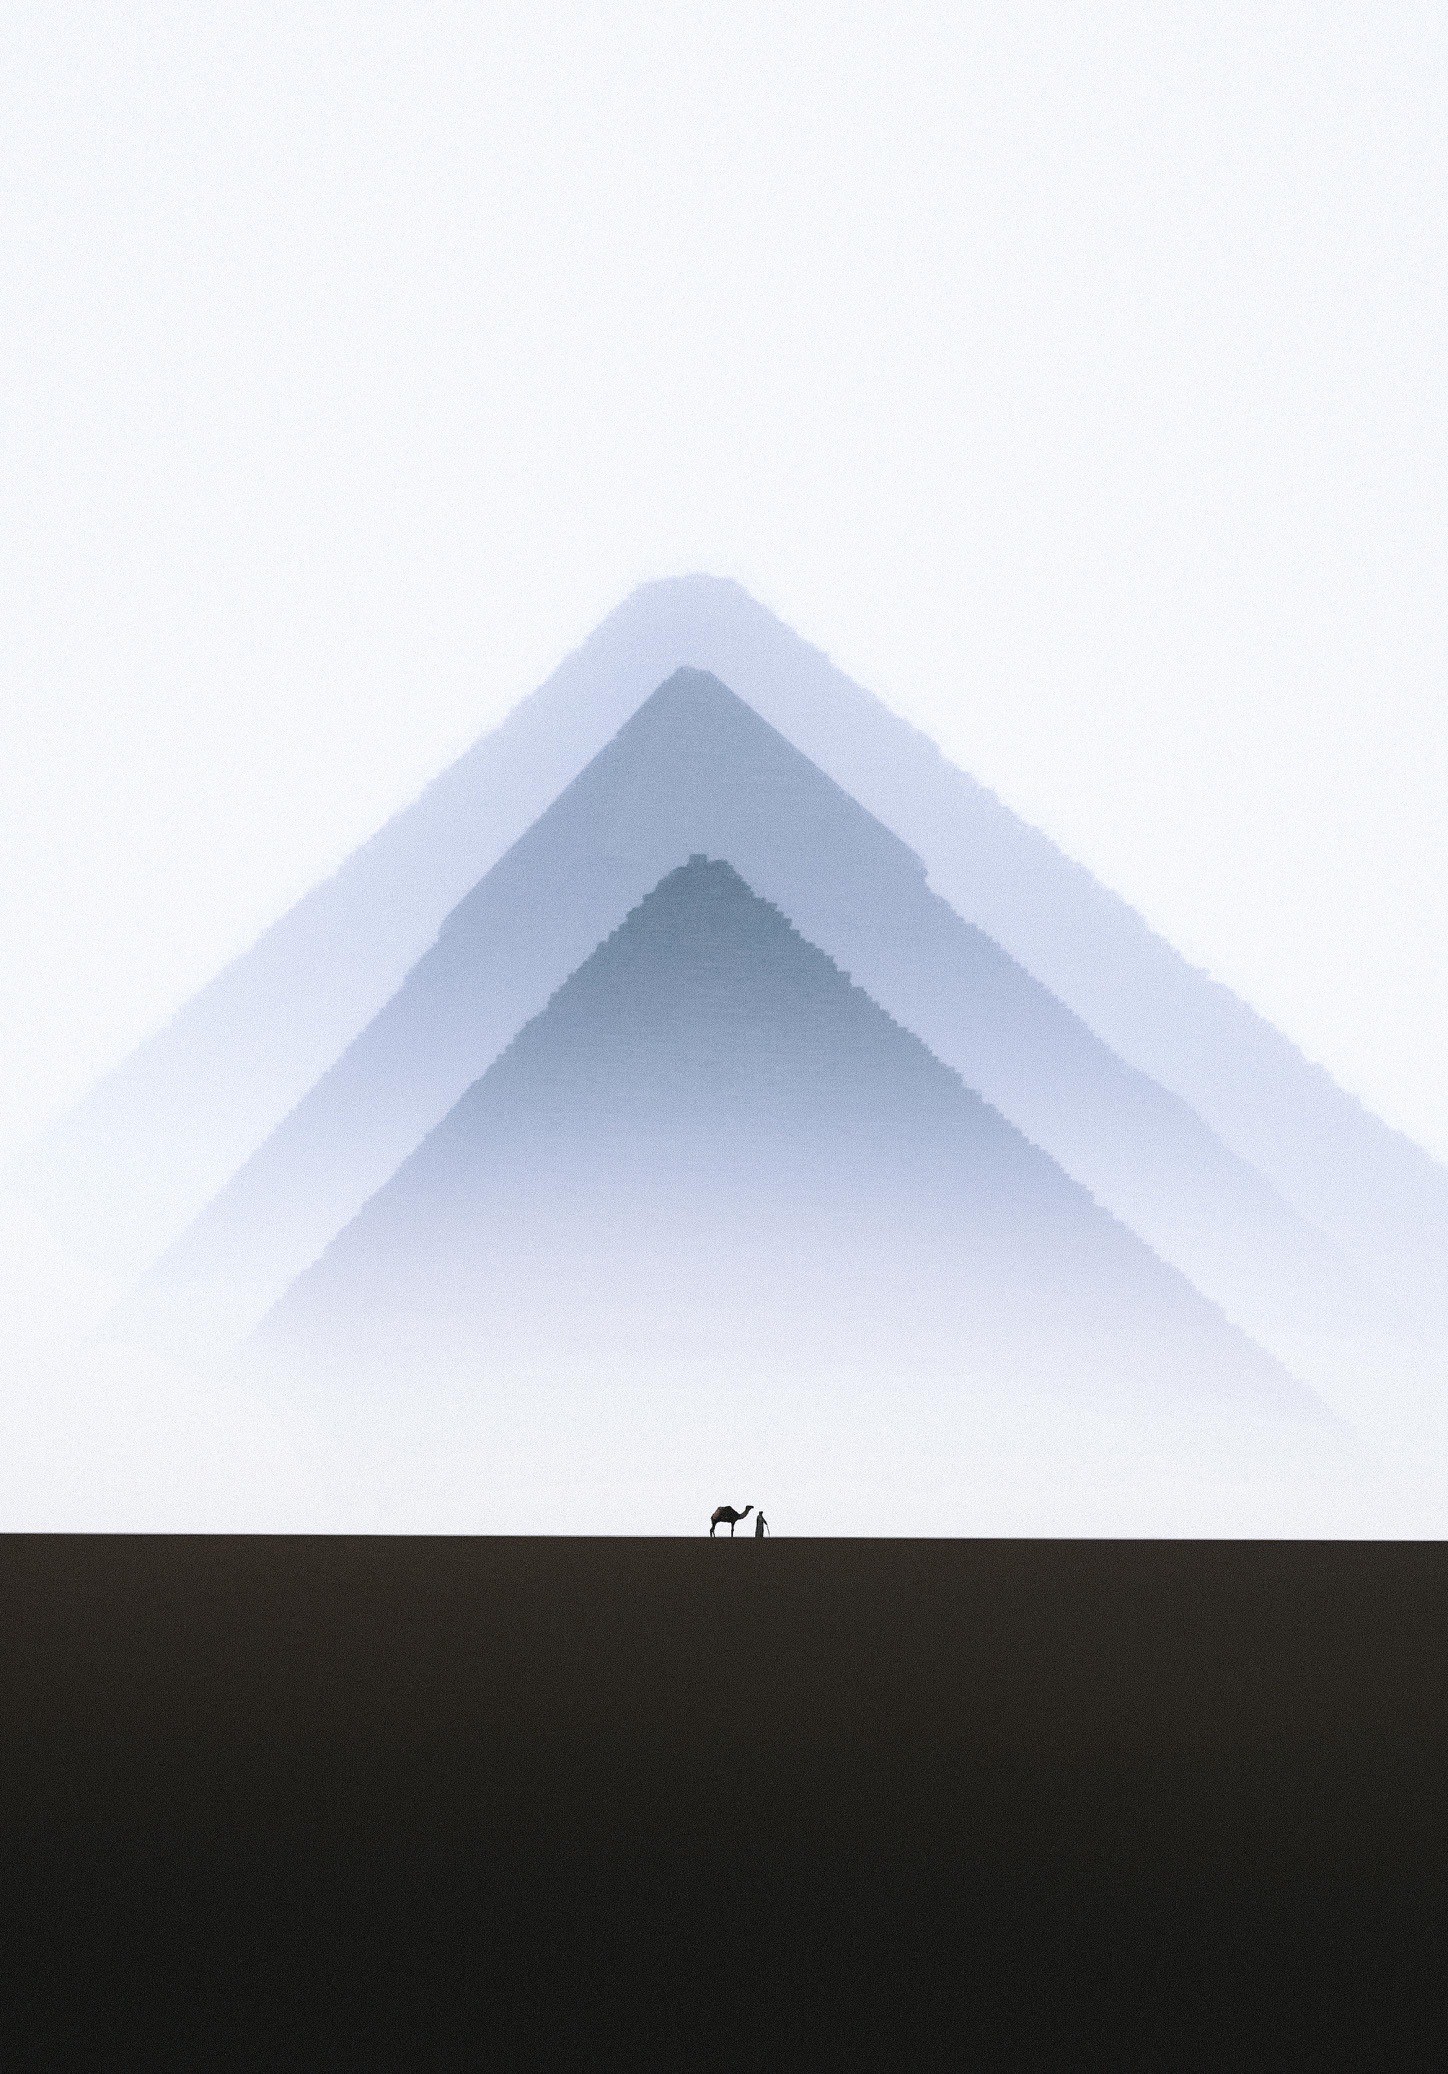 Photographer monitors the silent isolation of Egypt's pyramids and deserts